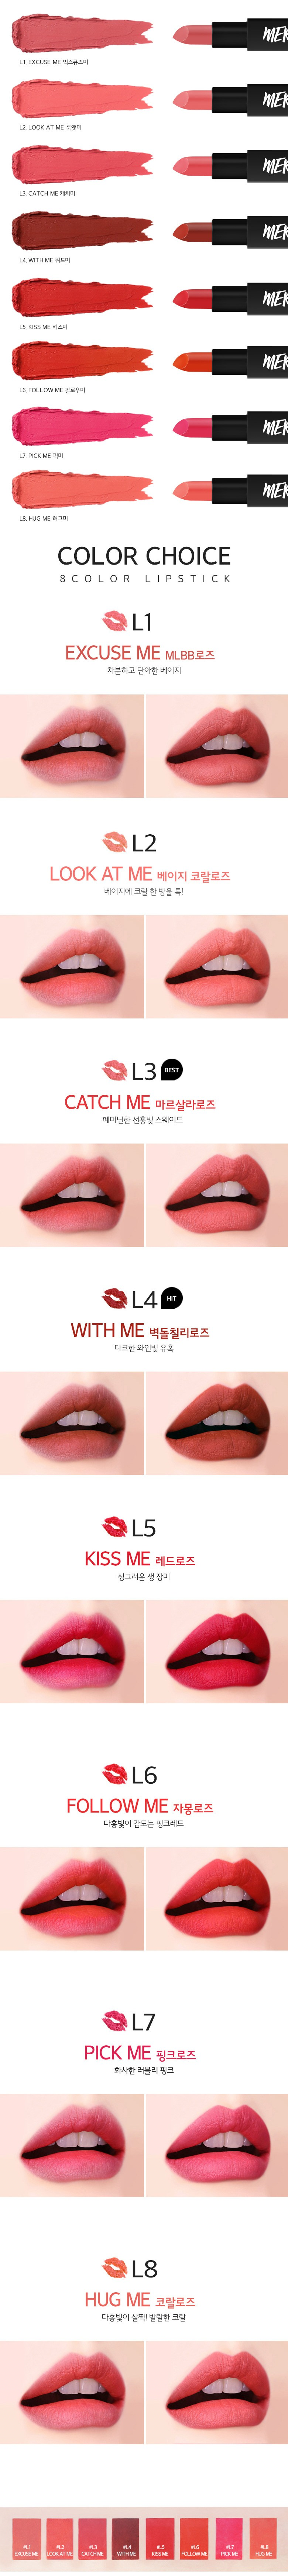 MERZY The First Lipstick Hug Me Coral Rose L8 3.5g 1